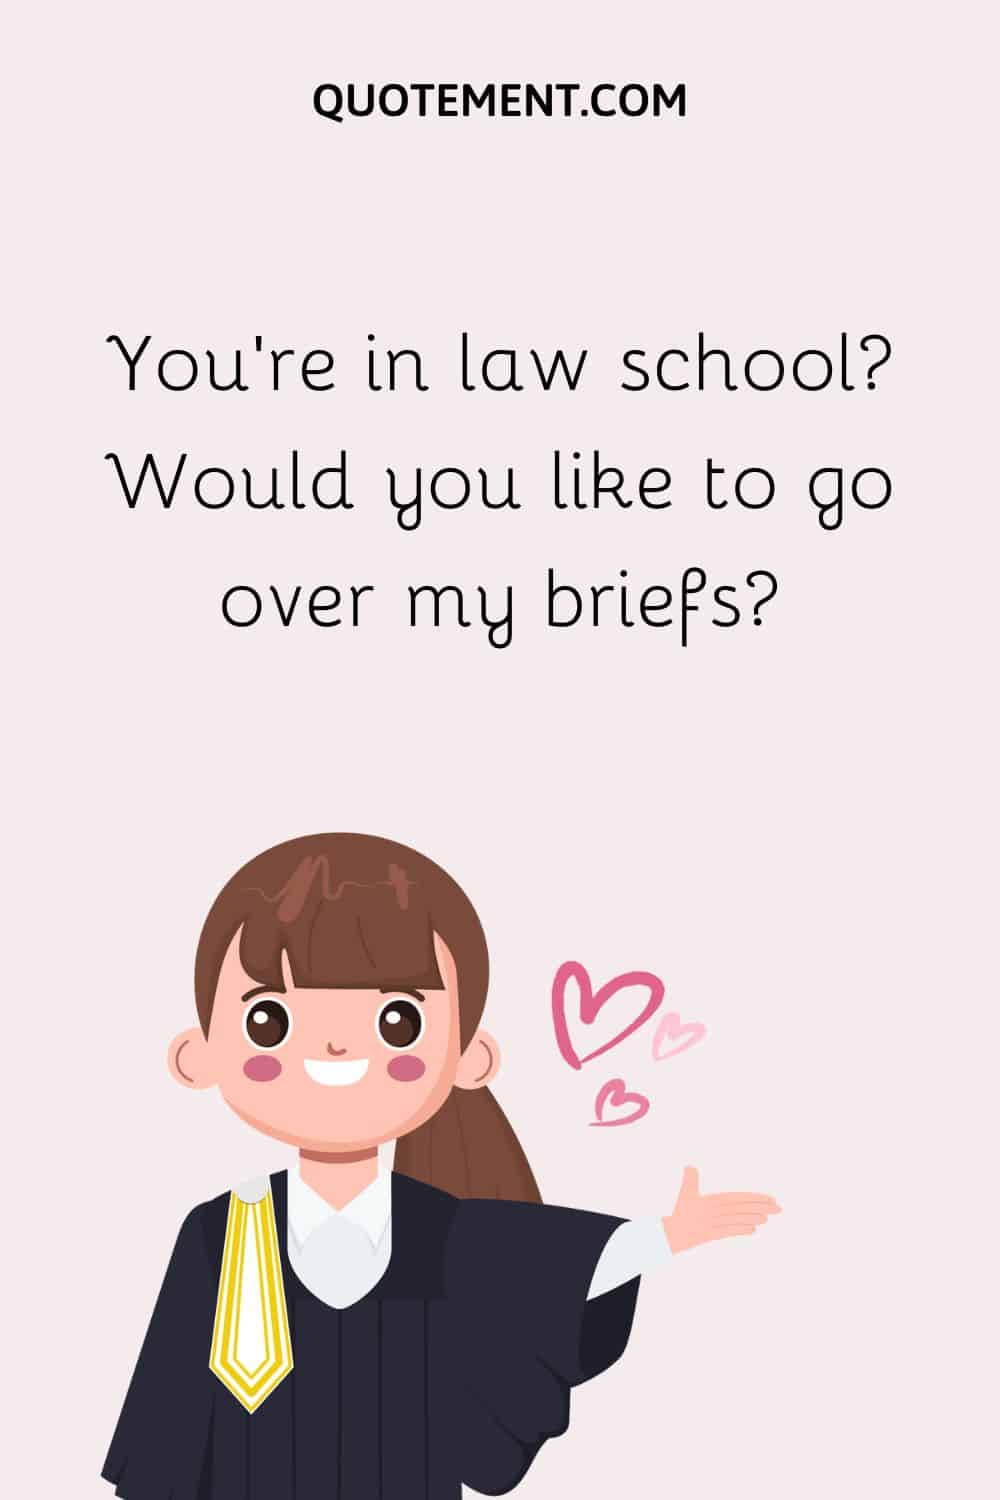 You’re in law school Would you like to go over my briefs